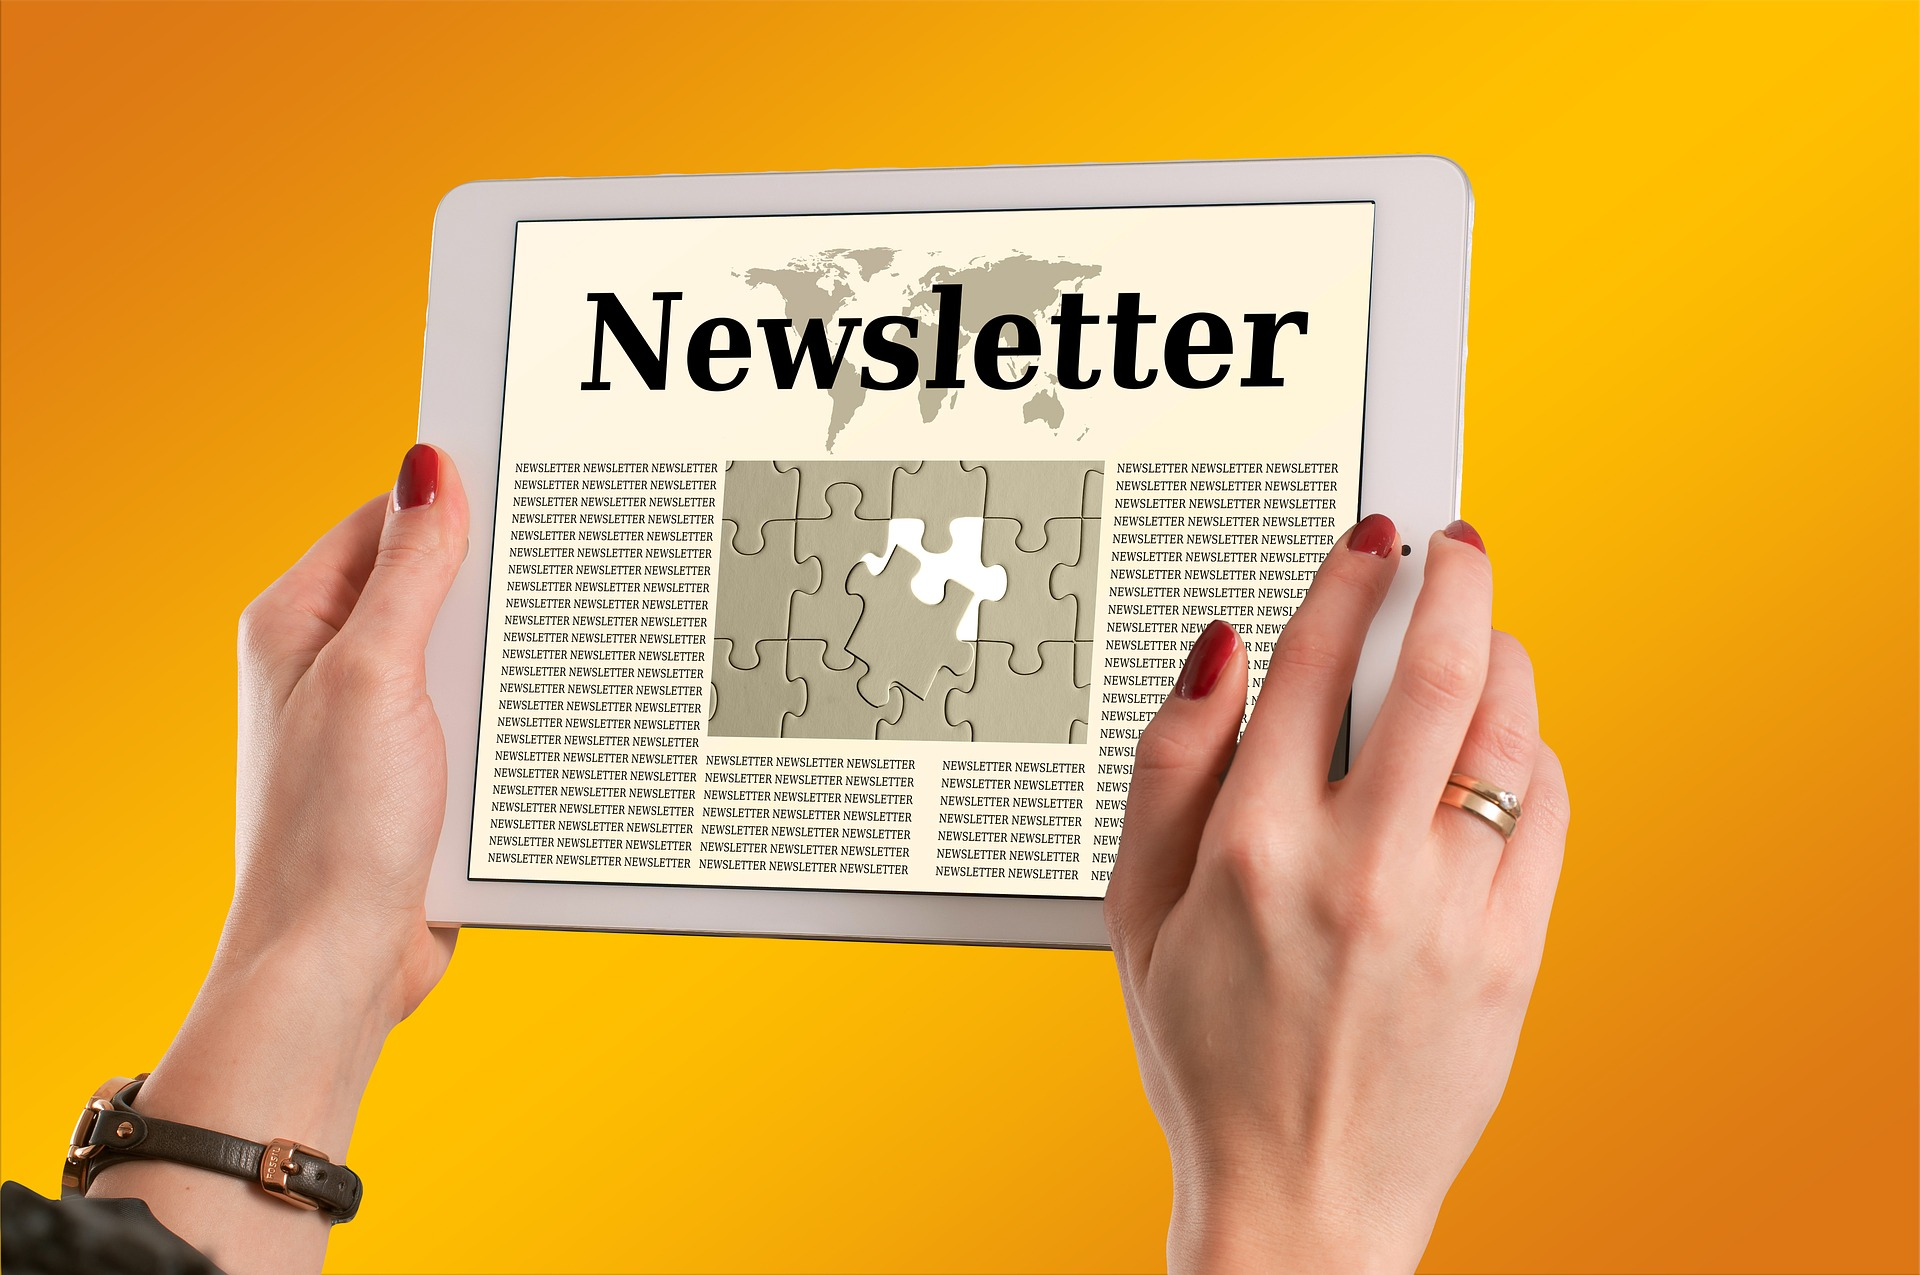 Newsletters as a lead generation strategy